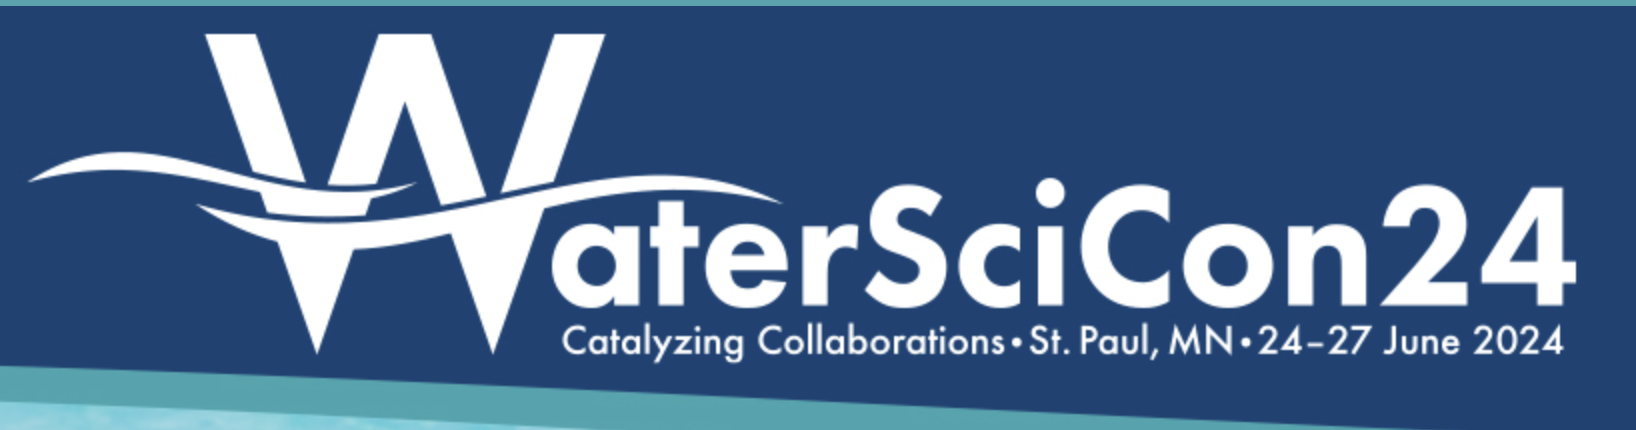 WaterSciCon24 Catalyzing Collaborations • St. Paul, MN • 24-27 June 2024 The Water Science Conference will be held in Saint Paul, MN on 24-27 June 2024.